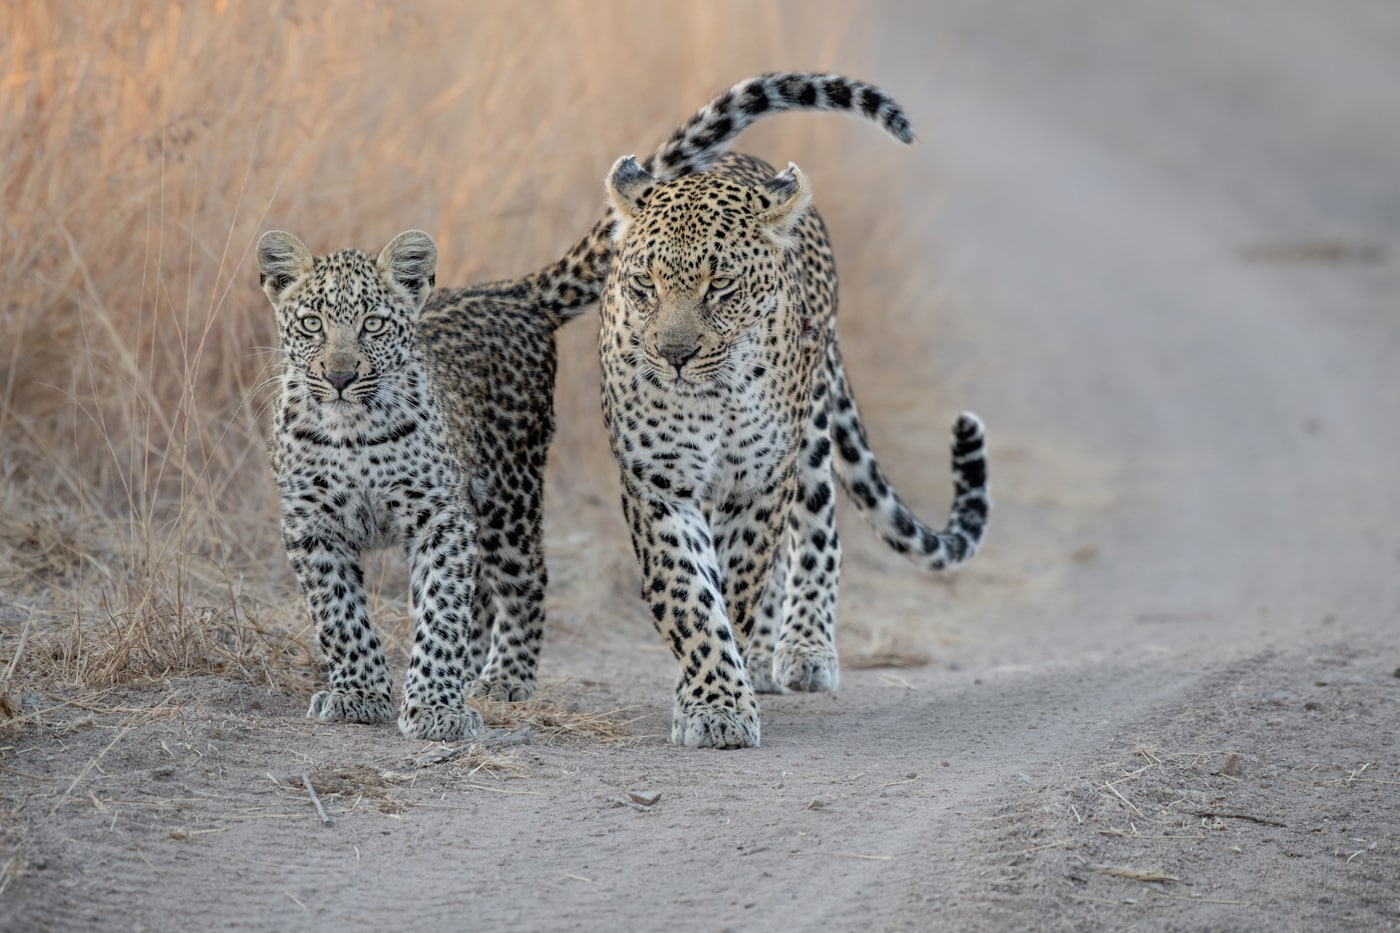 Londolozi Game Reserve,south Africa,a Mother Leopard And Her Cub, Panthera Pardus, Walk Along A Sand Road